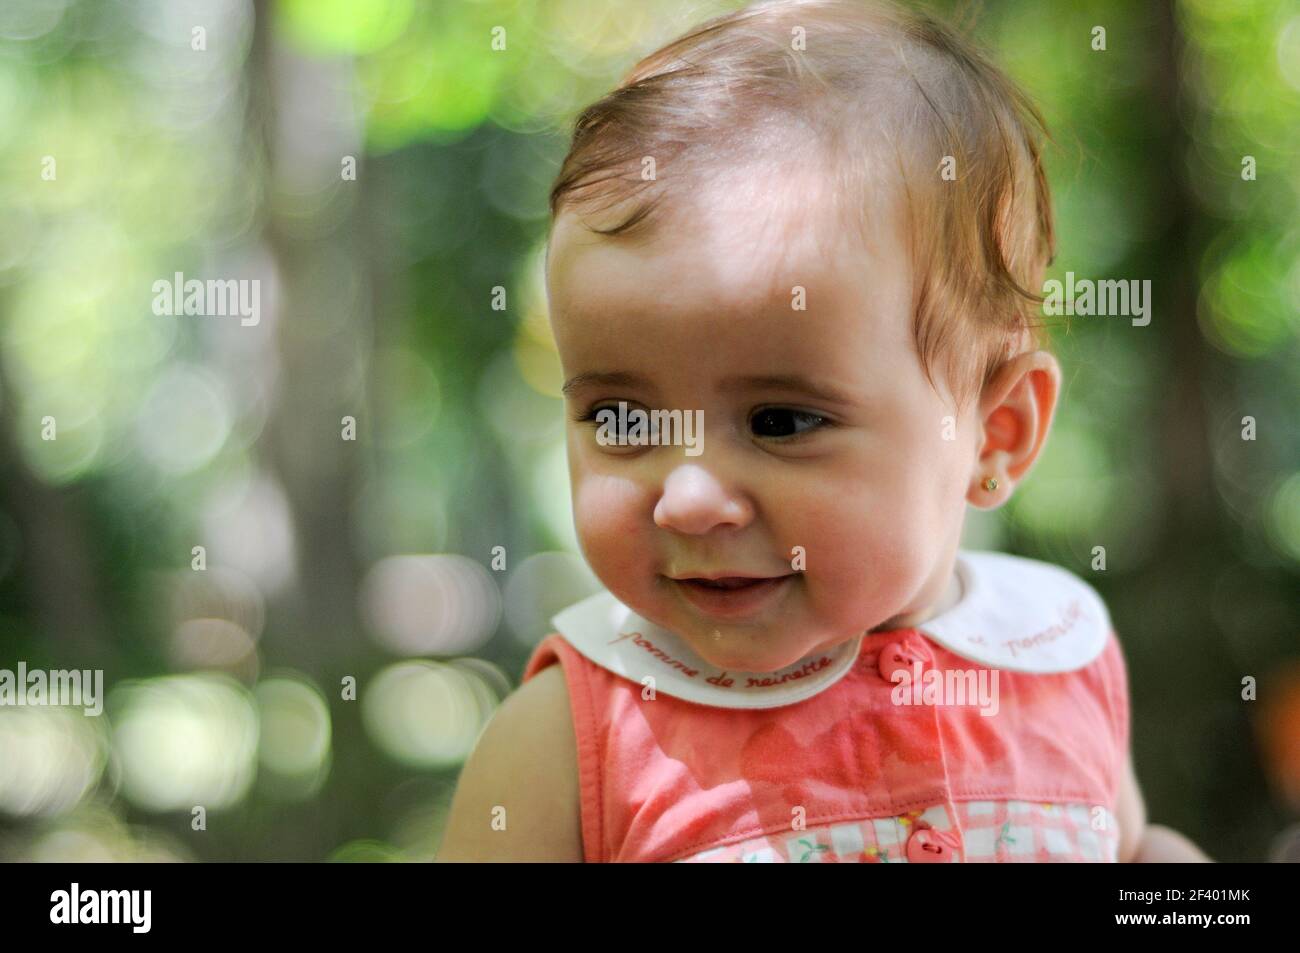 Six months old baby girl smiling outdoors.. Close-up portrait of six months old baby girl smiling outdoors with defocused background. Stock Photo